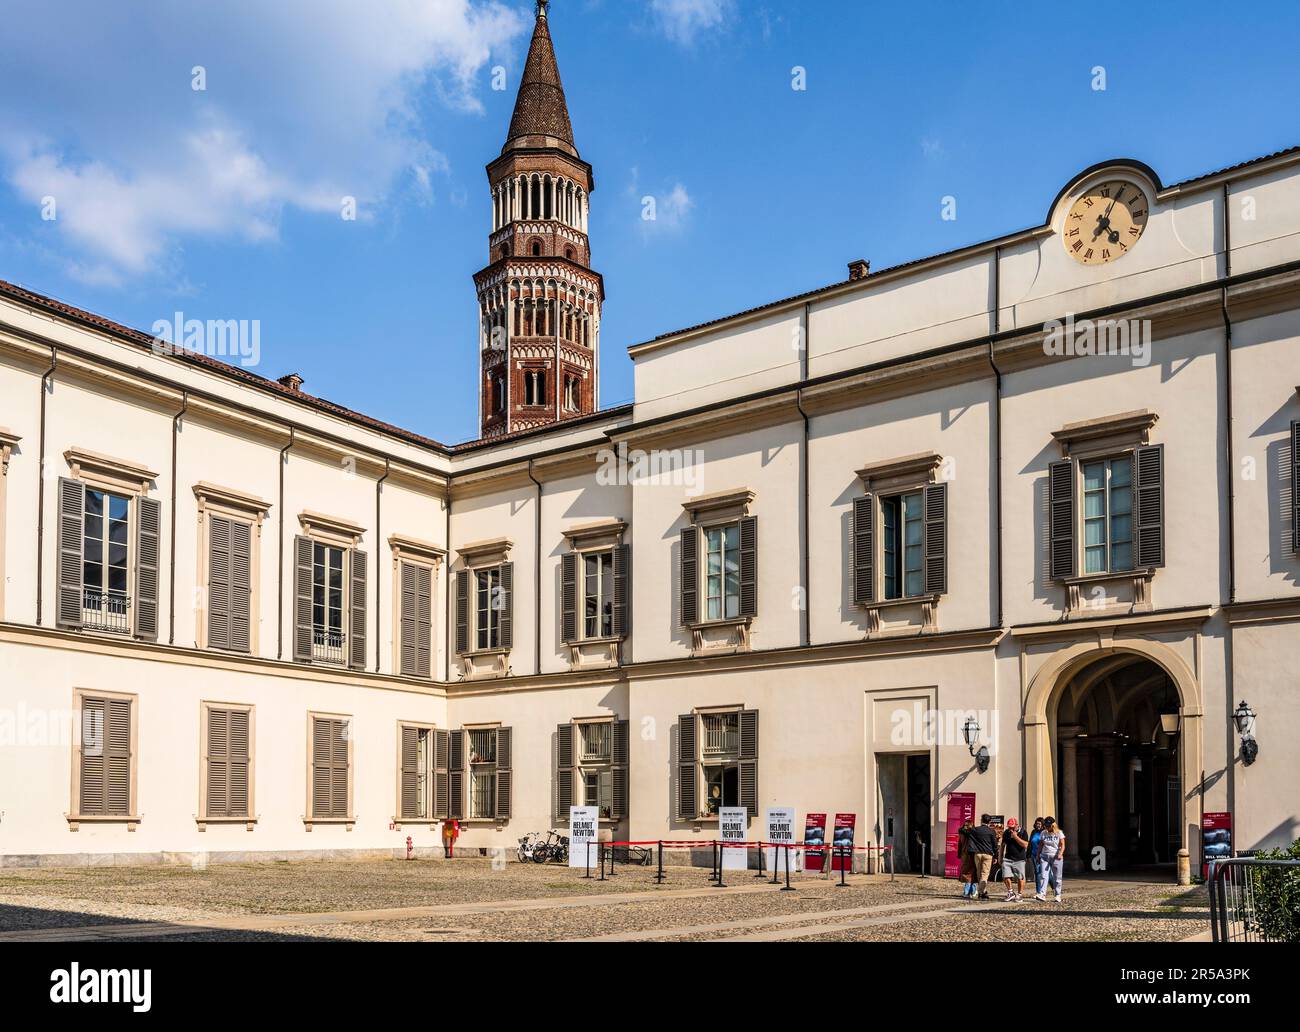 The courtyard of Palazzo Reale ('Royal Palace') with tourists and the tower of San Gottardo in Corte church, in Milano city center, Italy Stock Photo